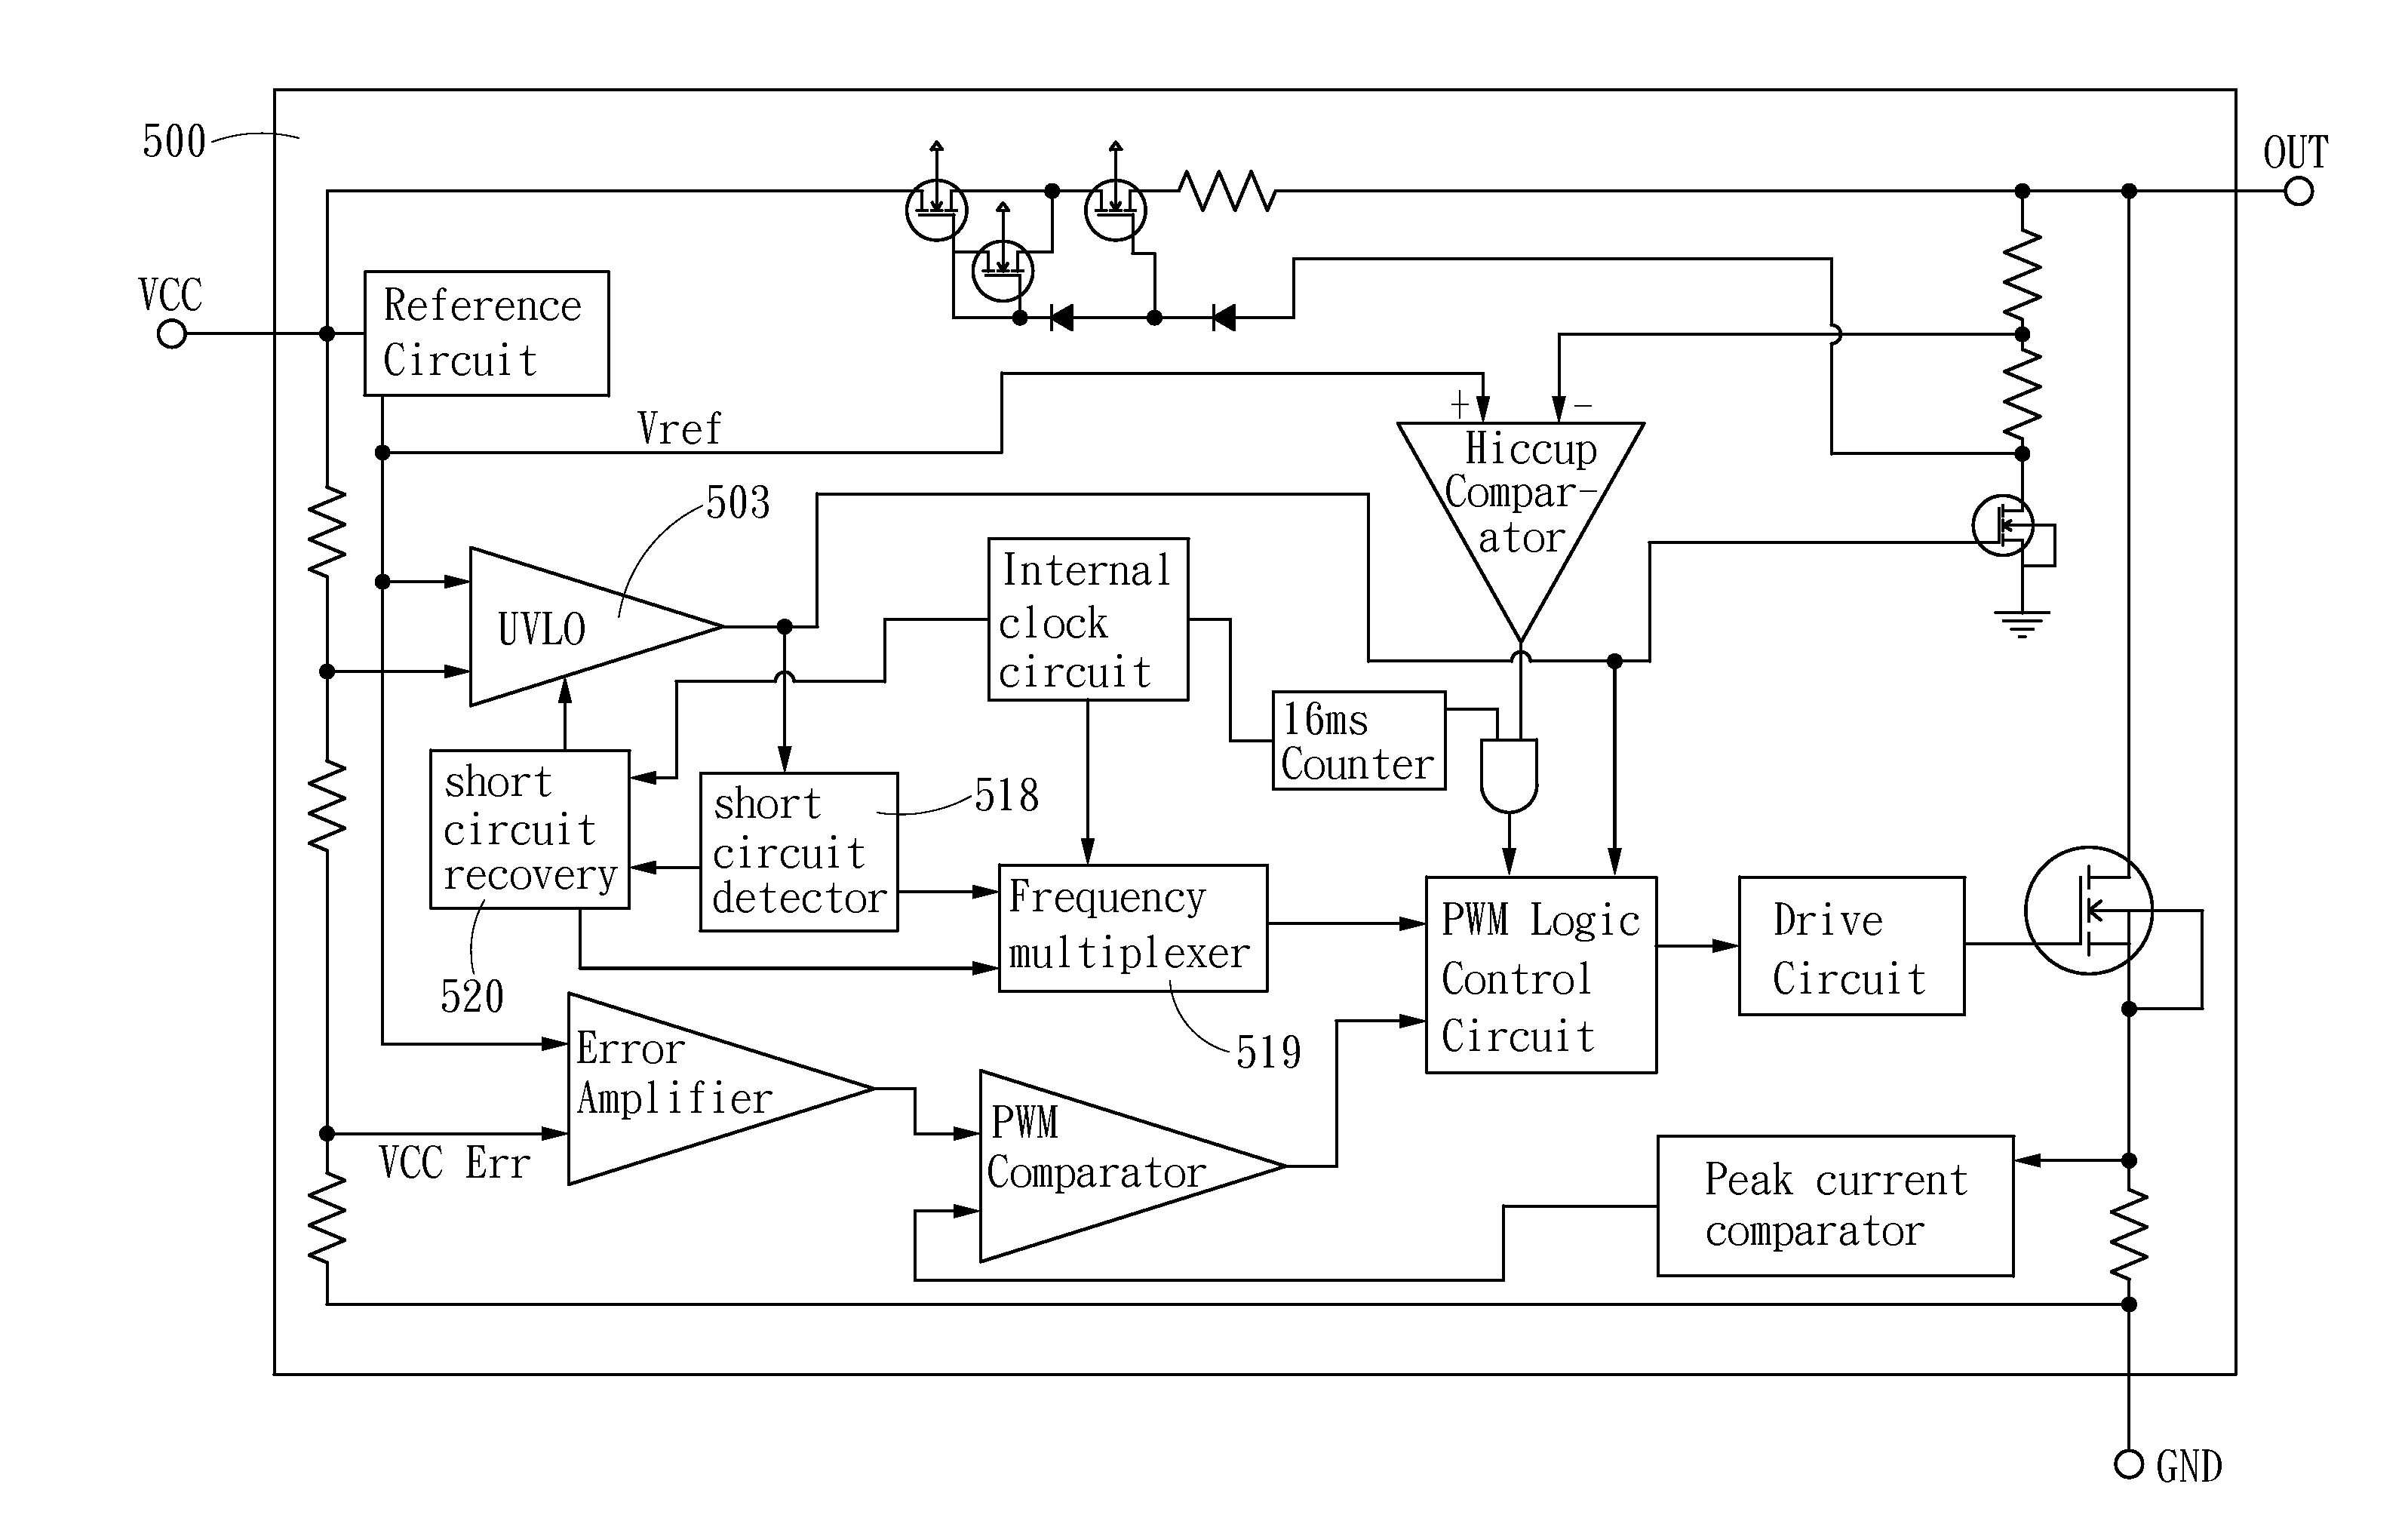 Short circuit protection circuit for a pulse width modulation (PWM) unit